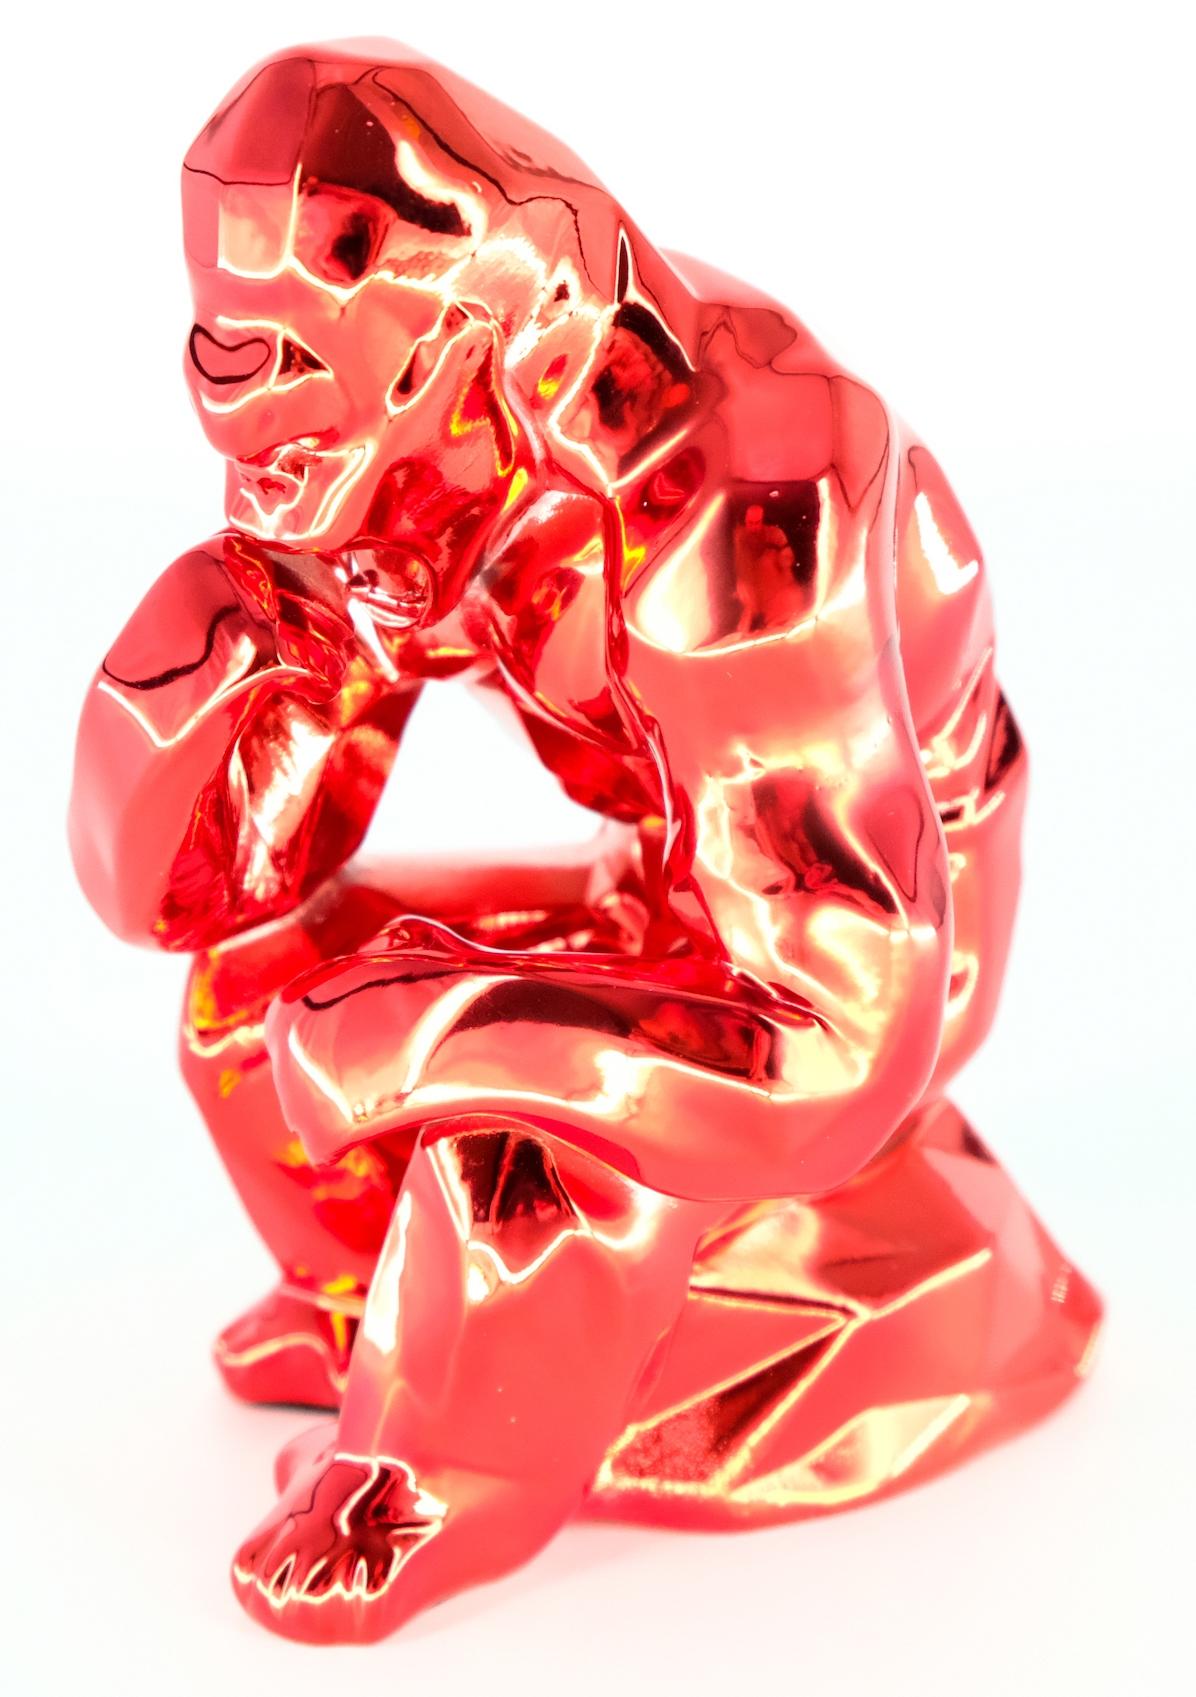 Richard ORLINSKI
Orlinski's thinker Spirit (Red Edition)

Sculpture in resin
Metallic Red
About 10 x 13 x 7 cm (c. 3, x 5,1 x 2,8 in)
Presented in original box with certificate

Excellent condition